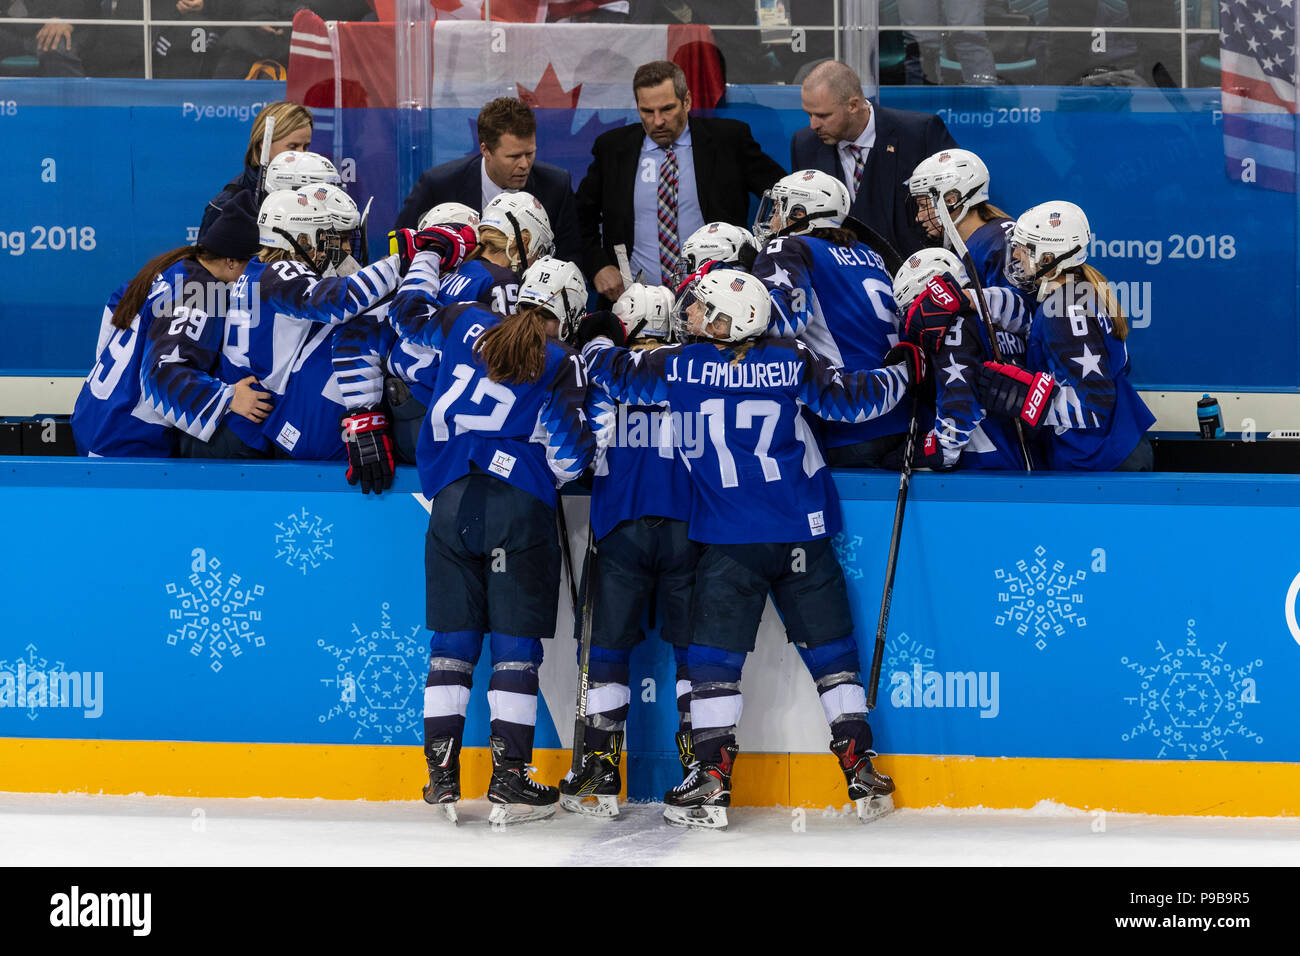 Usa Coach With Team Usa During The Gold Medal Women S Ice Hockey Game Usa Vs Canada At The Olympic Winter Games Pyeongchang 18 Stock Photo Alamy